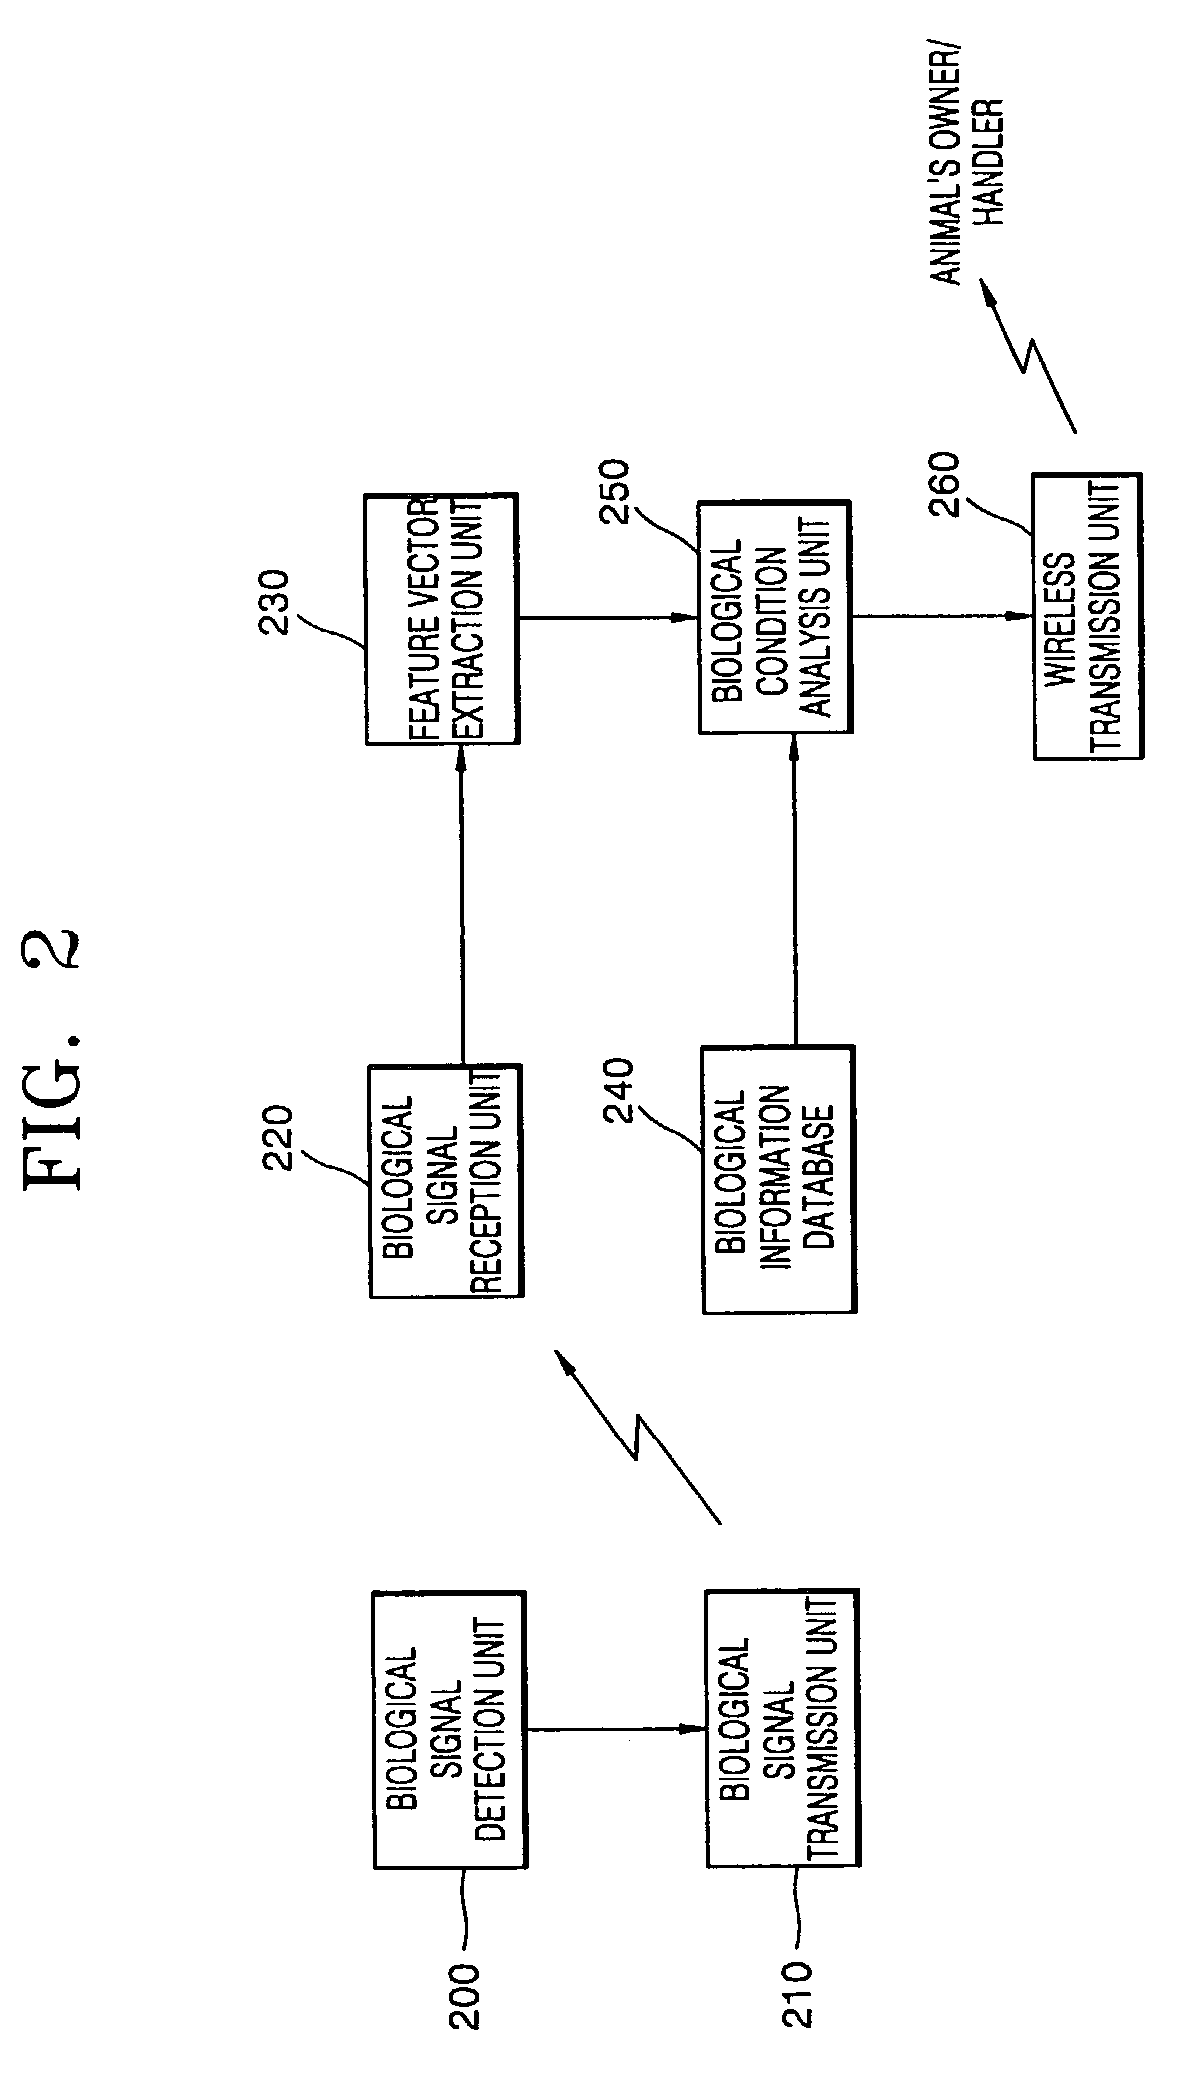 Method and apparatus for measuring animal's condition by acquiring and analyzing its biological signals